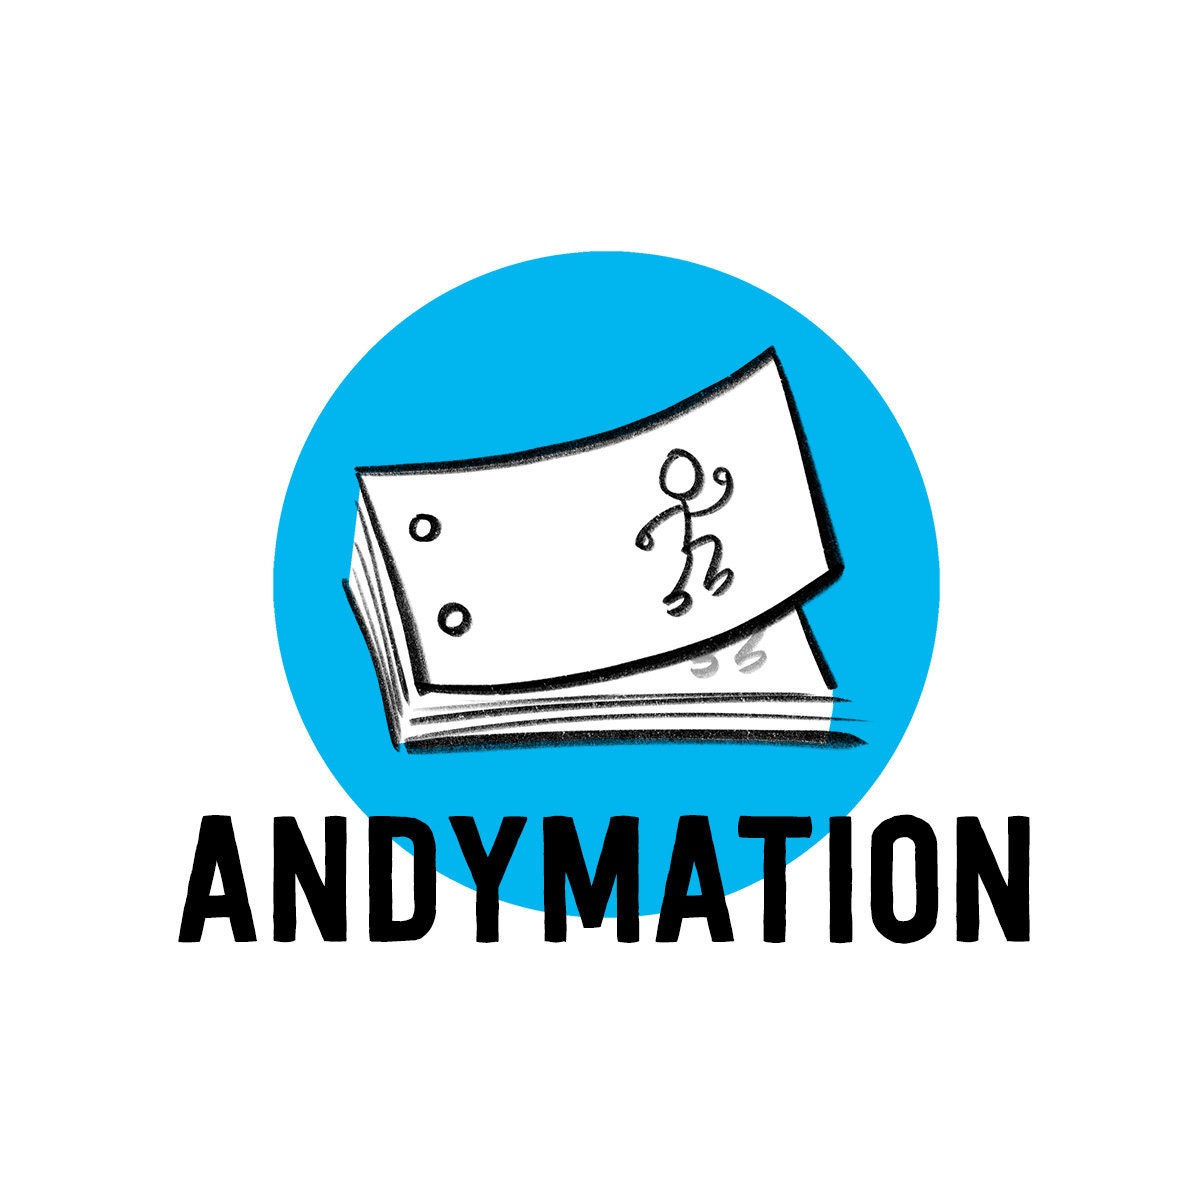 Andymation Signature Flipbook Kit for Kids & Adults 